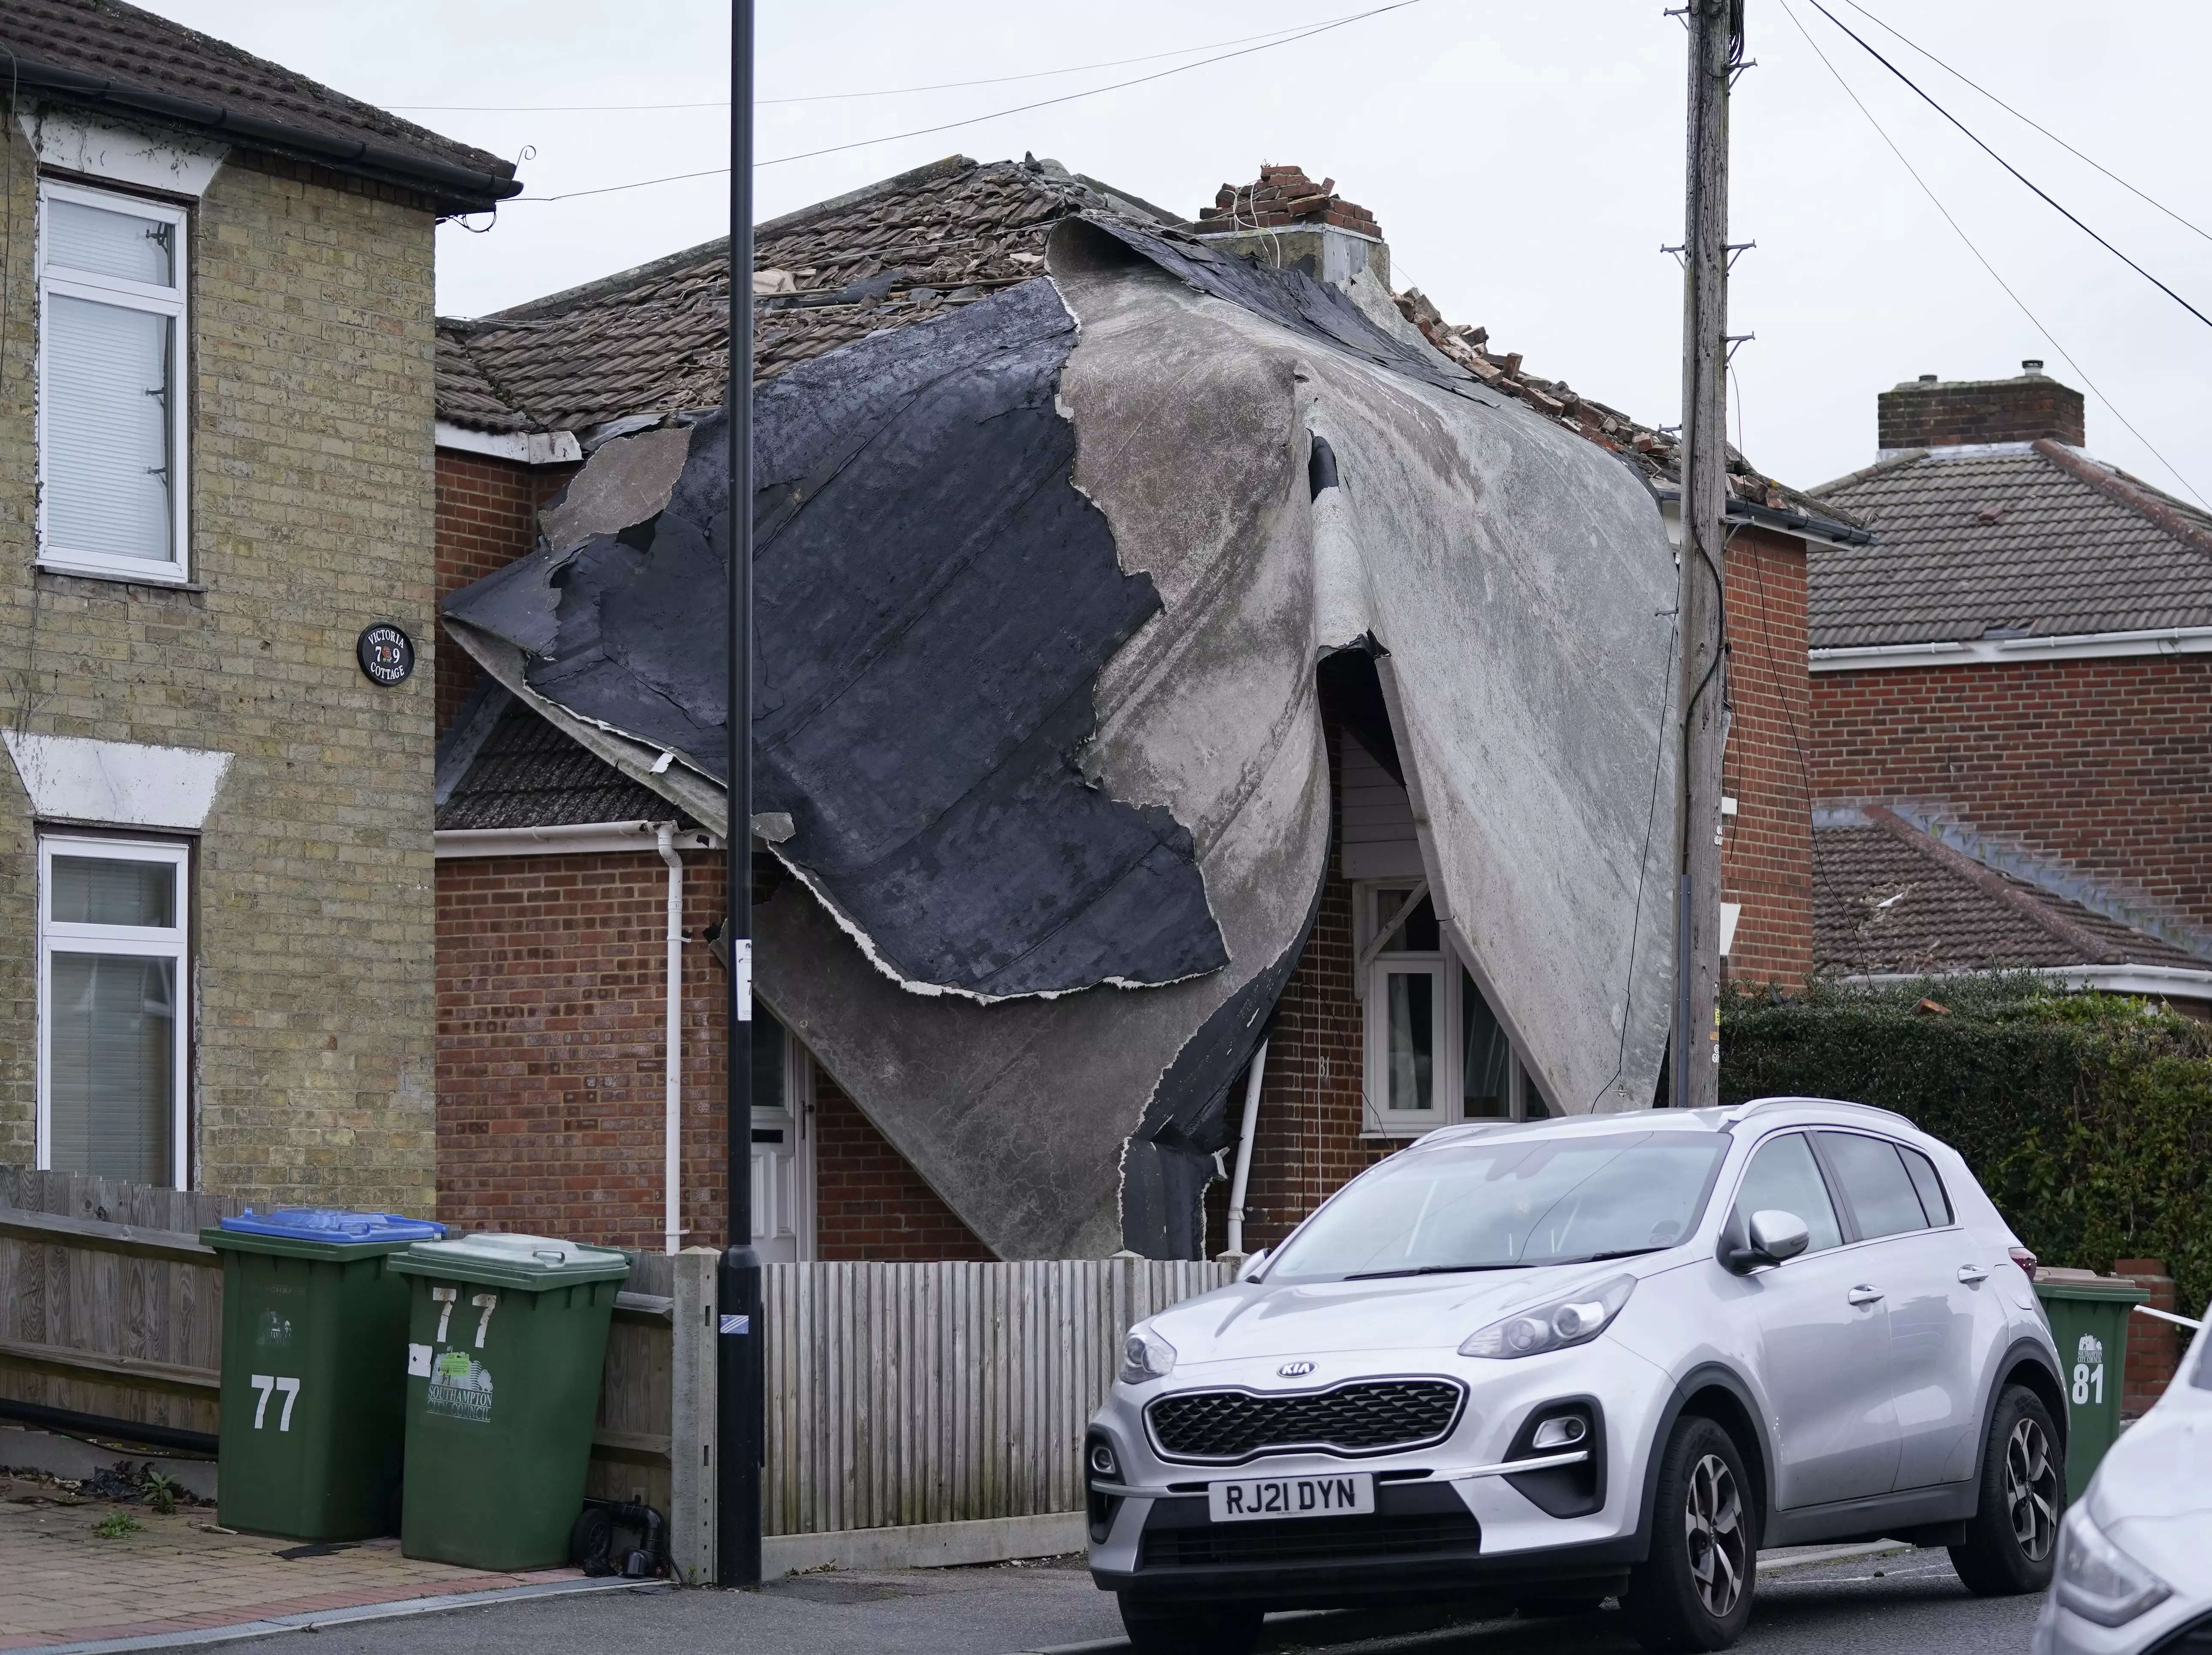 A view of part of a flat roof from a nearby block of flats which was blown off and landed on a house in Bitterne, Southampton, as Storm Eunice brought damage, disruption and record-breaking gusts of wind to the UK.